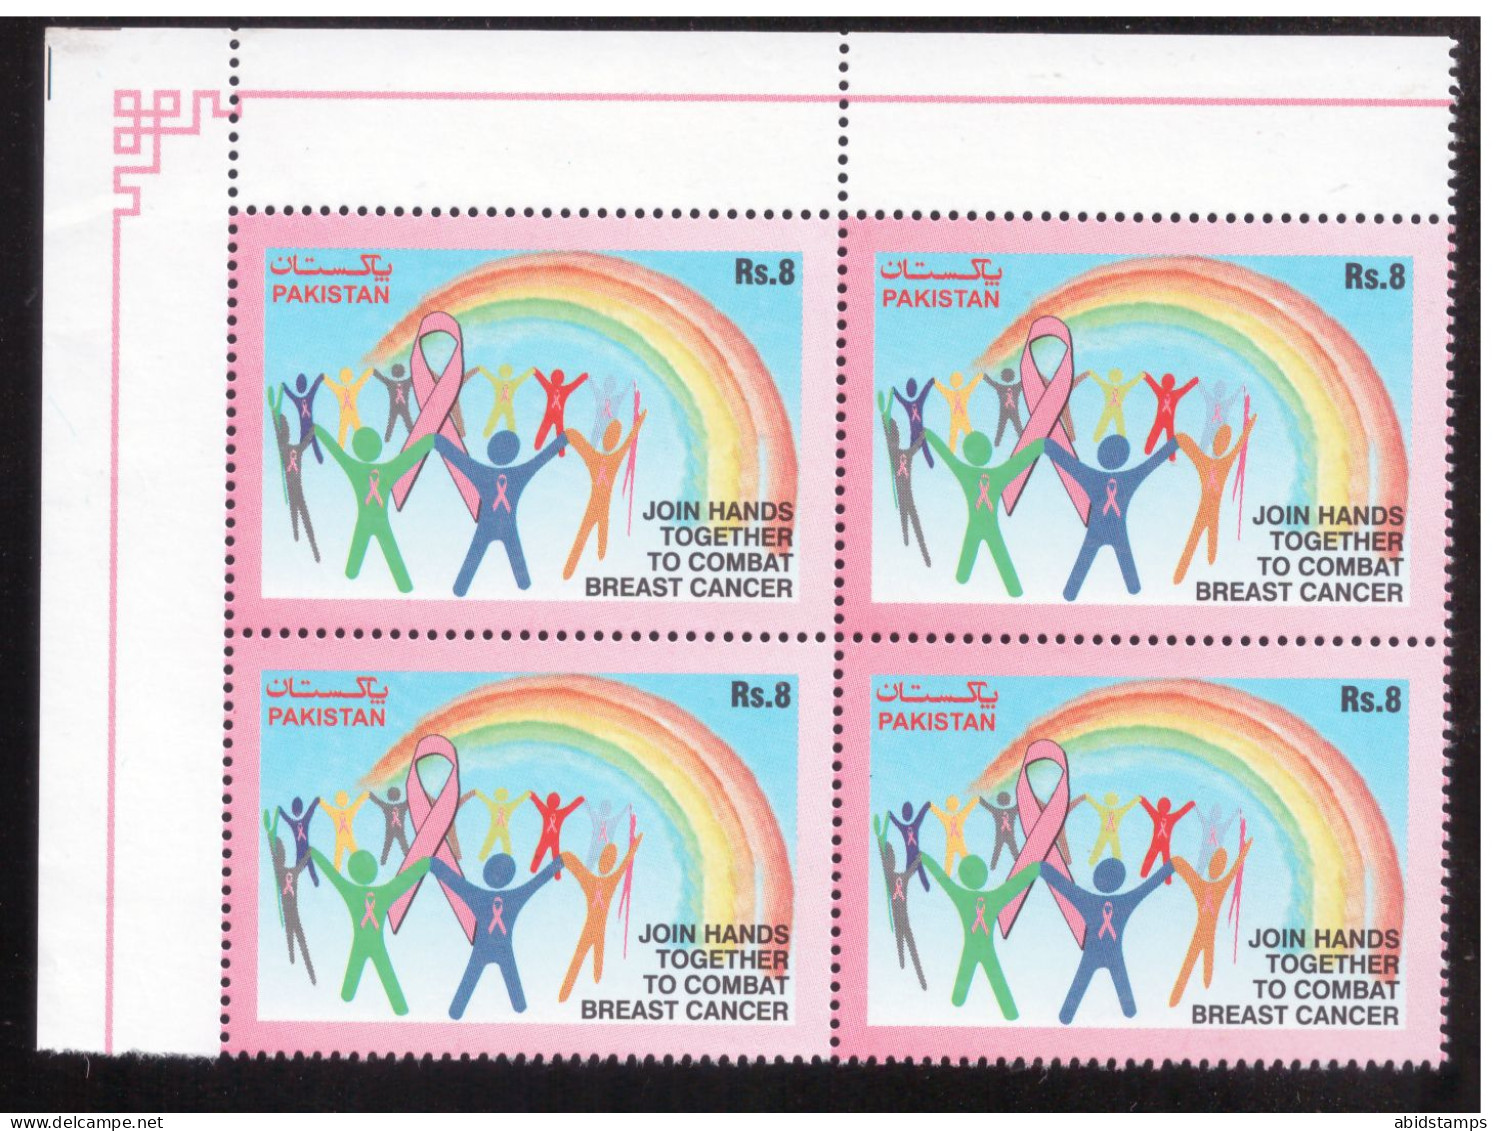 PAKISTAN STAMPS  2011 BREAST CANCER BLOCK OF FOUR MNH - Pakistan